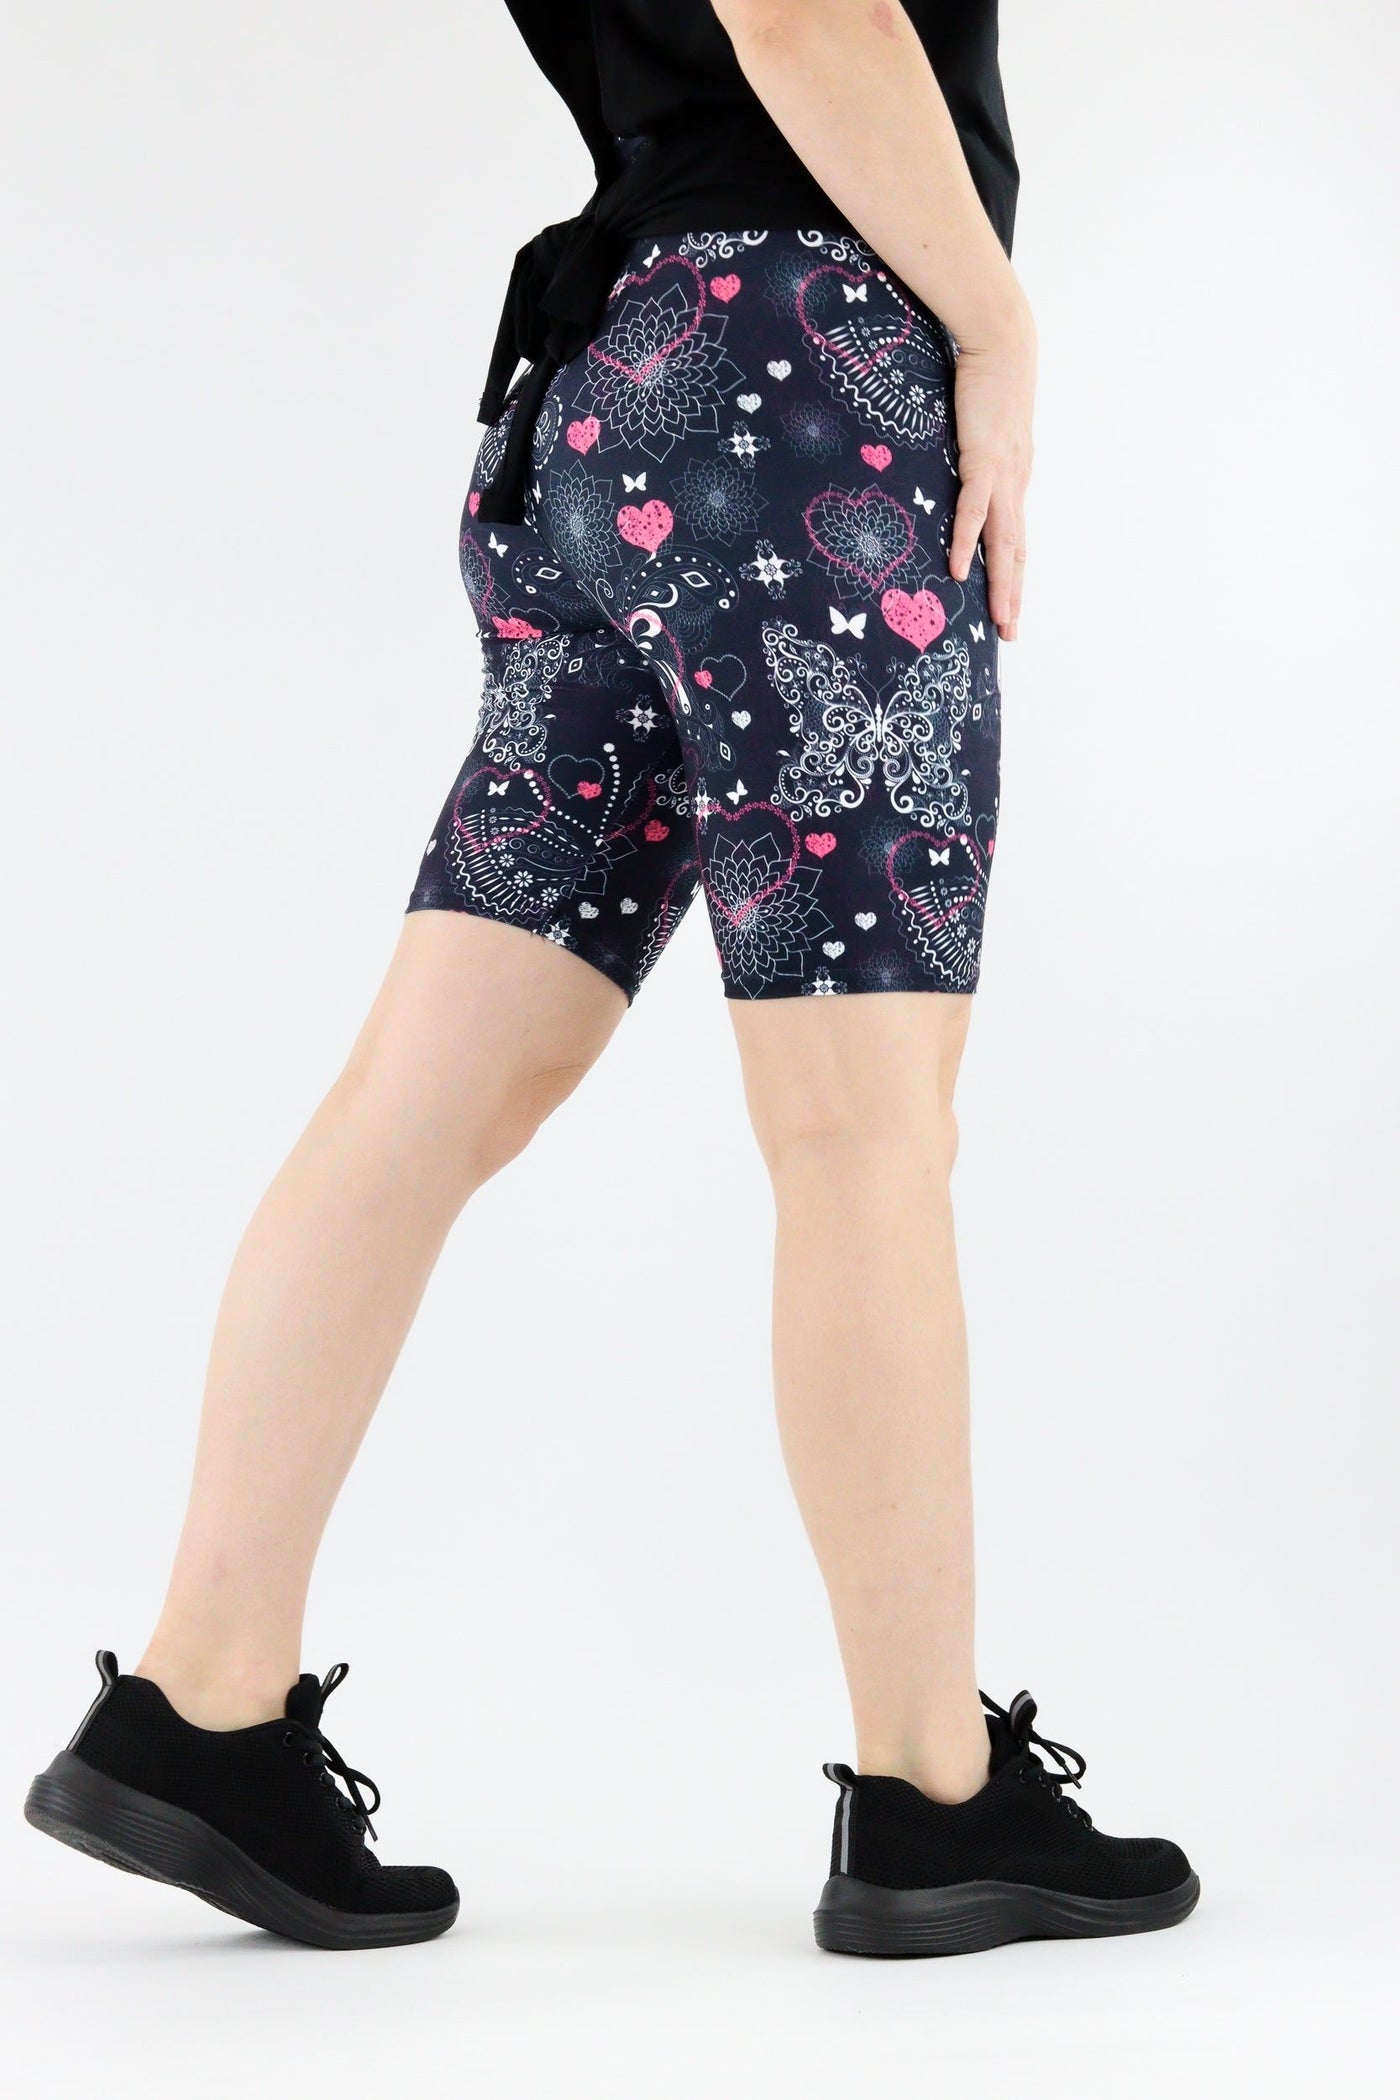 Butterfly Love - Casual Long Shorts Casual Shorts Pawlie   